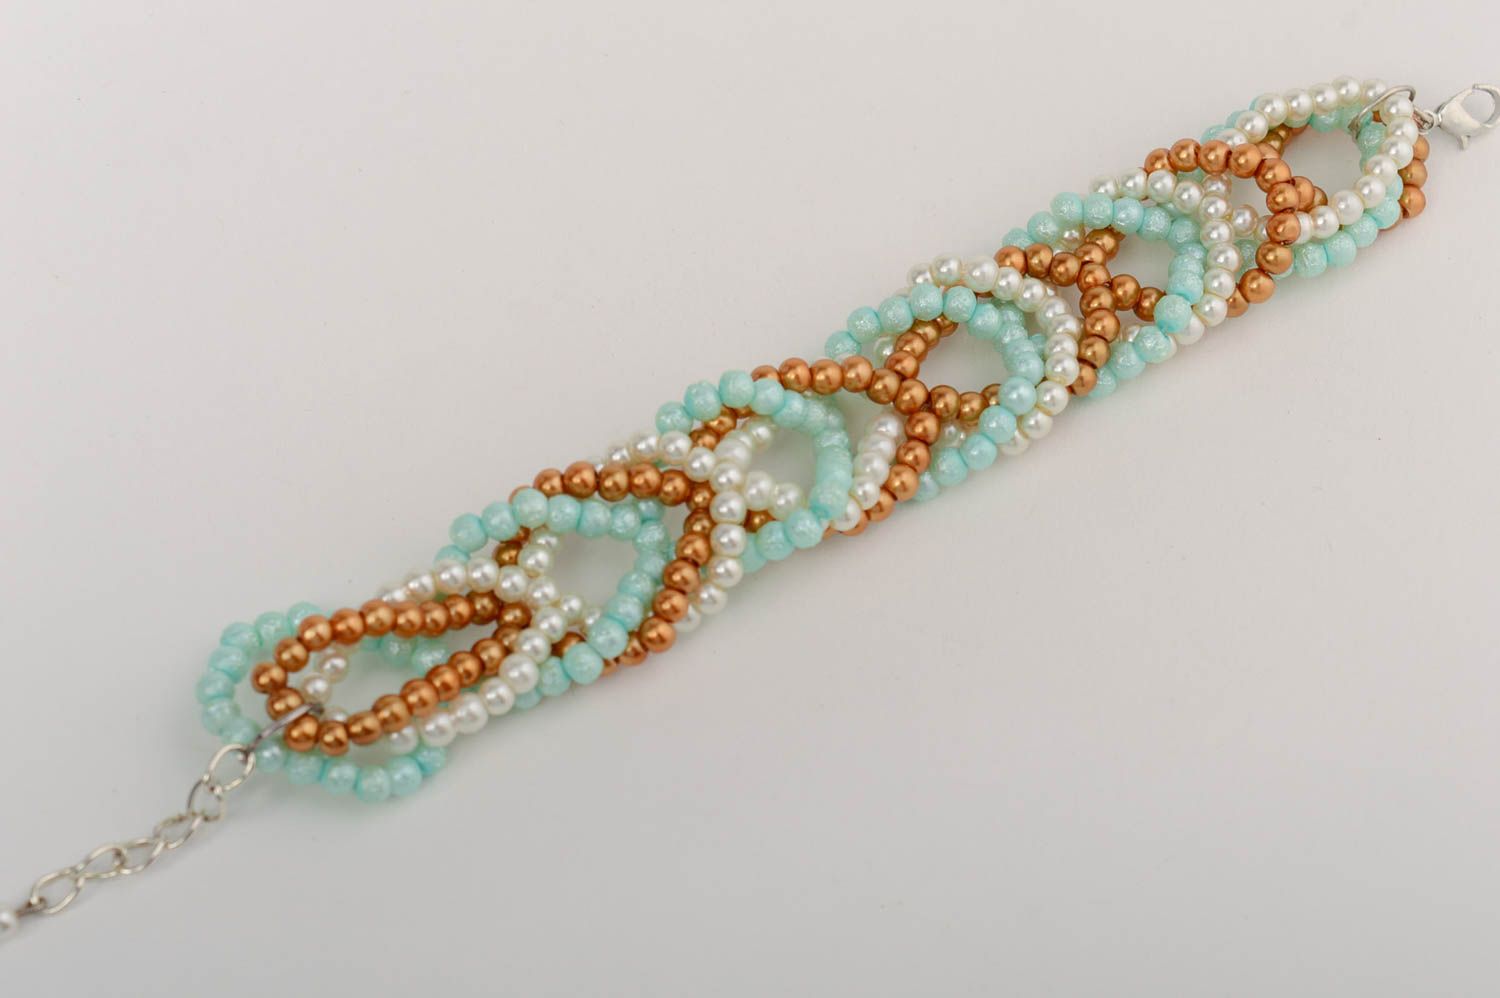 Handmade woven wrist bracelet with colorful light ceramic pearls for women photo 5